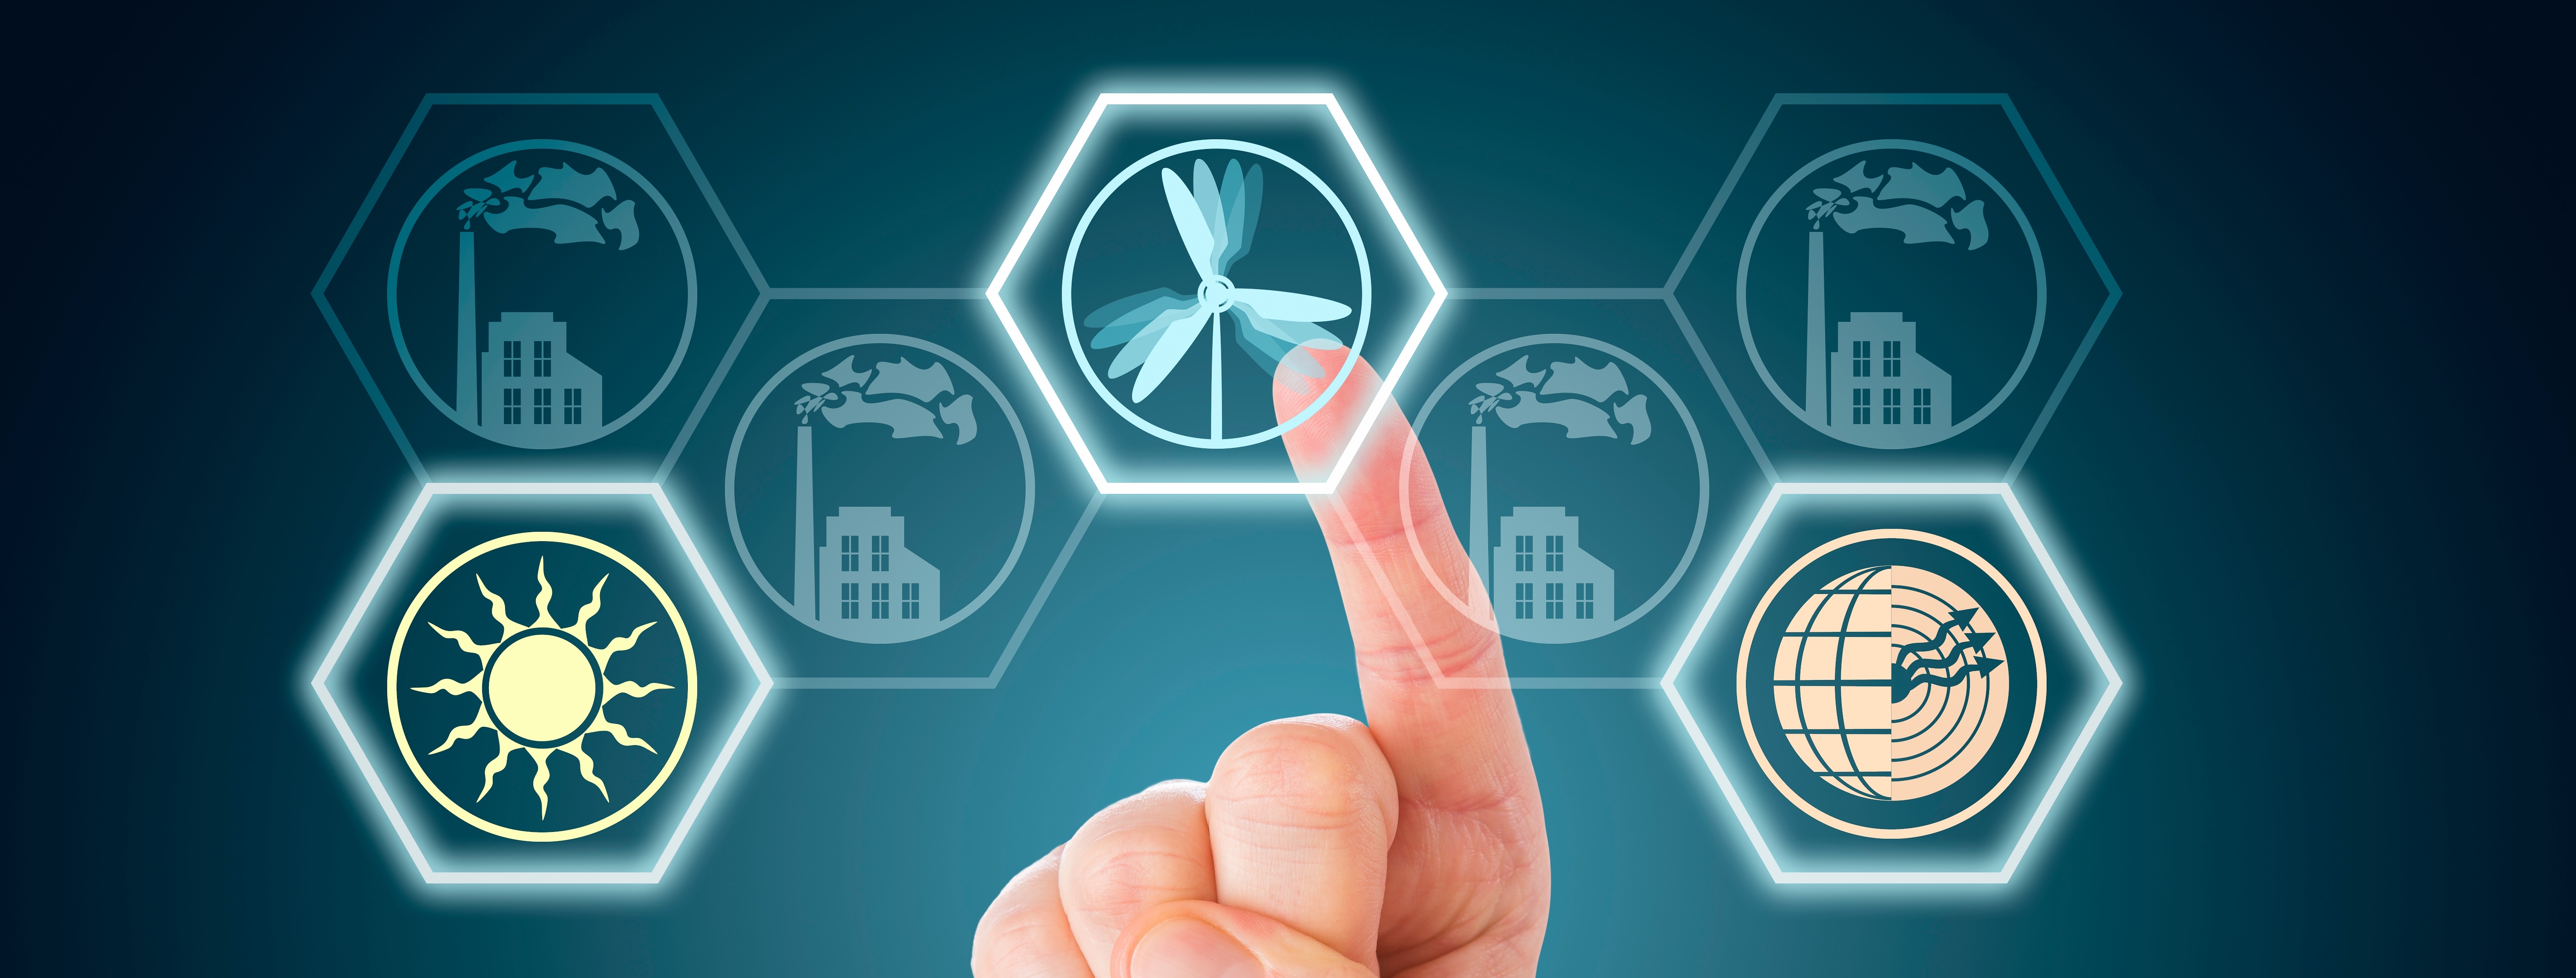 Index finger is selecting renewable energy icons via a virtual interface with hexagonal buttons. The selected symbols for solar, geothermal and wind power are lighting up over a dark blue background.